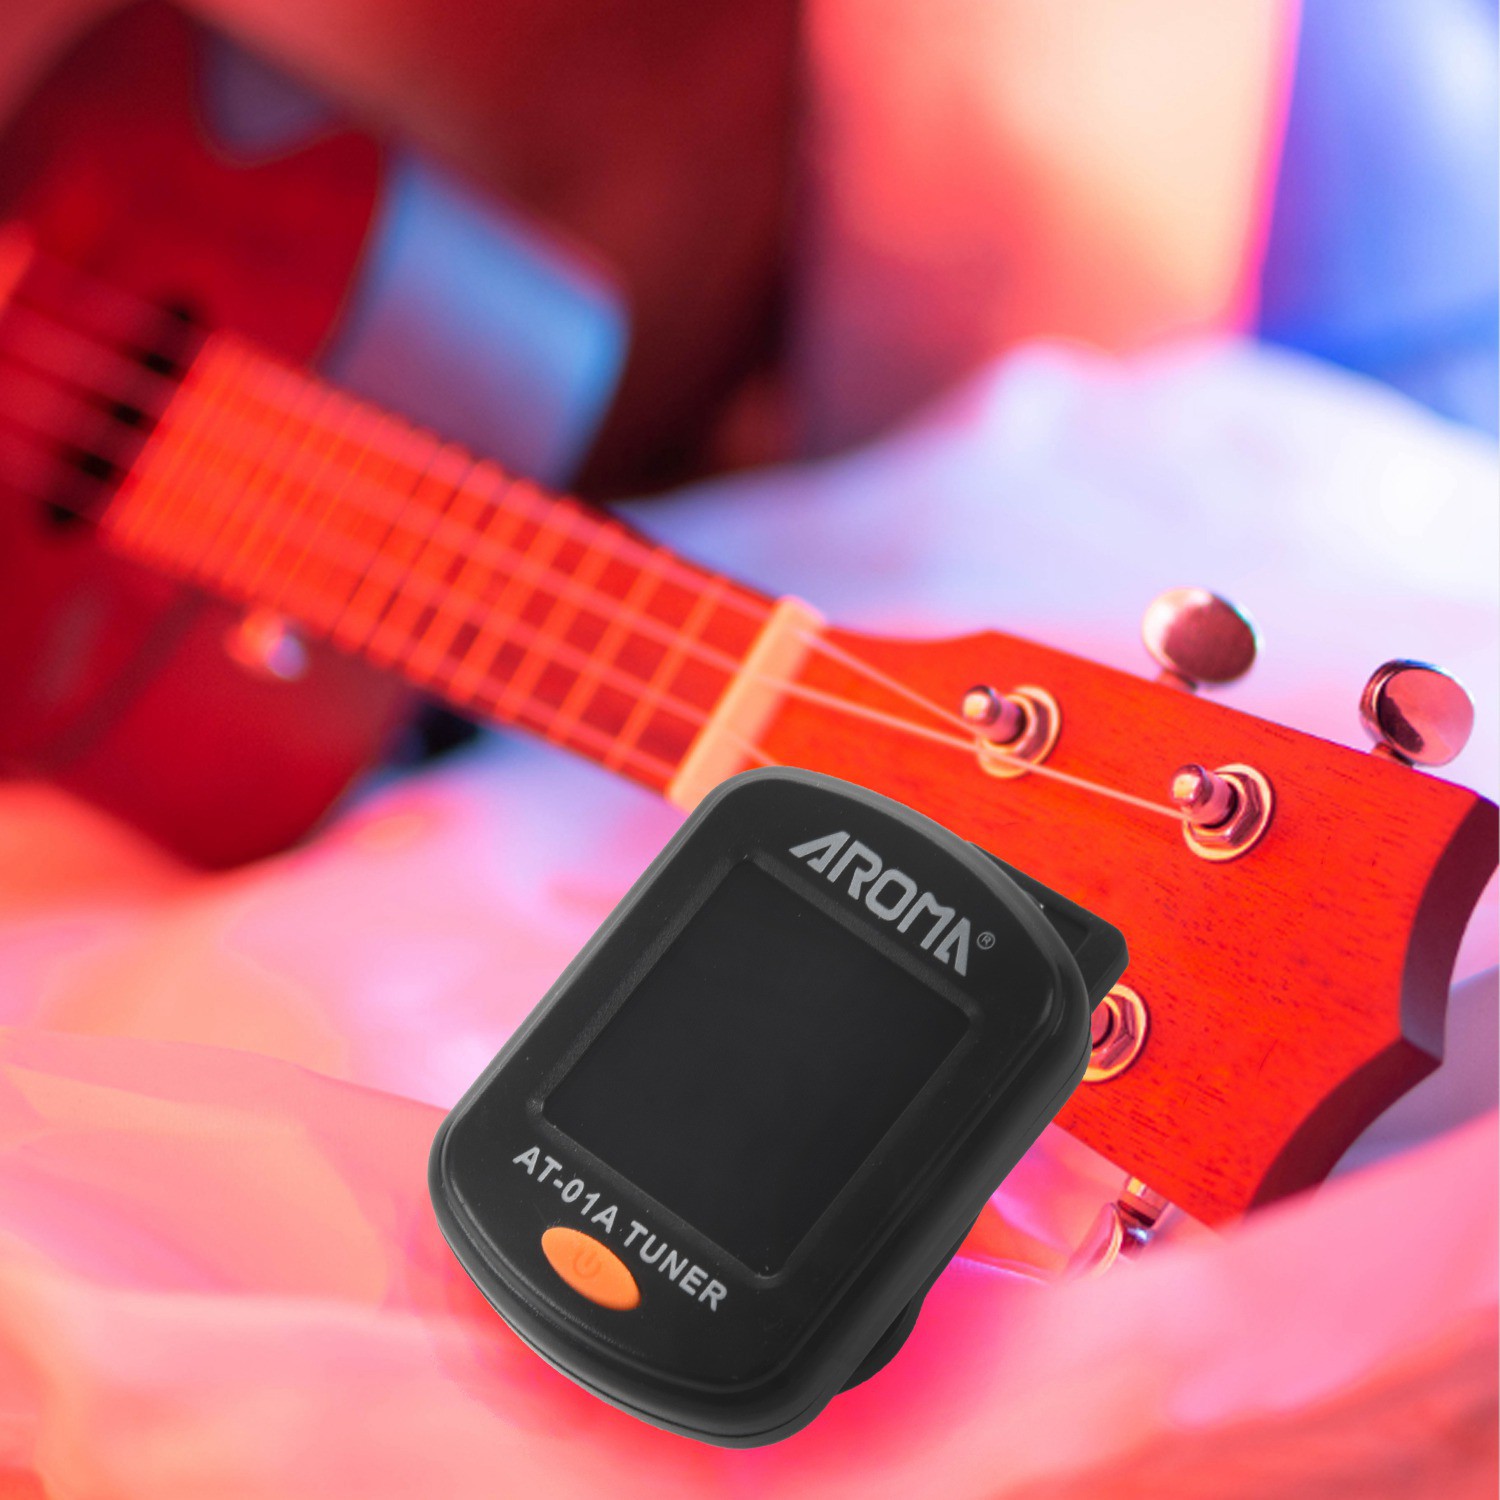 Aroma At-01A Guitar Tuner Rotatable Clip-On Tuner Lcd Display For Chromatic Acoustic Guitar Bass Ukulele